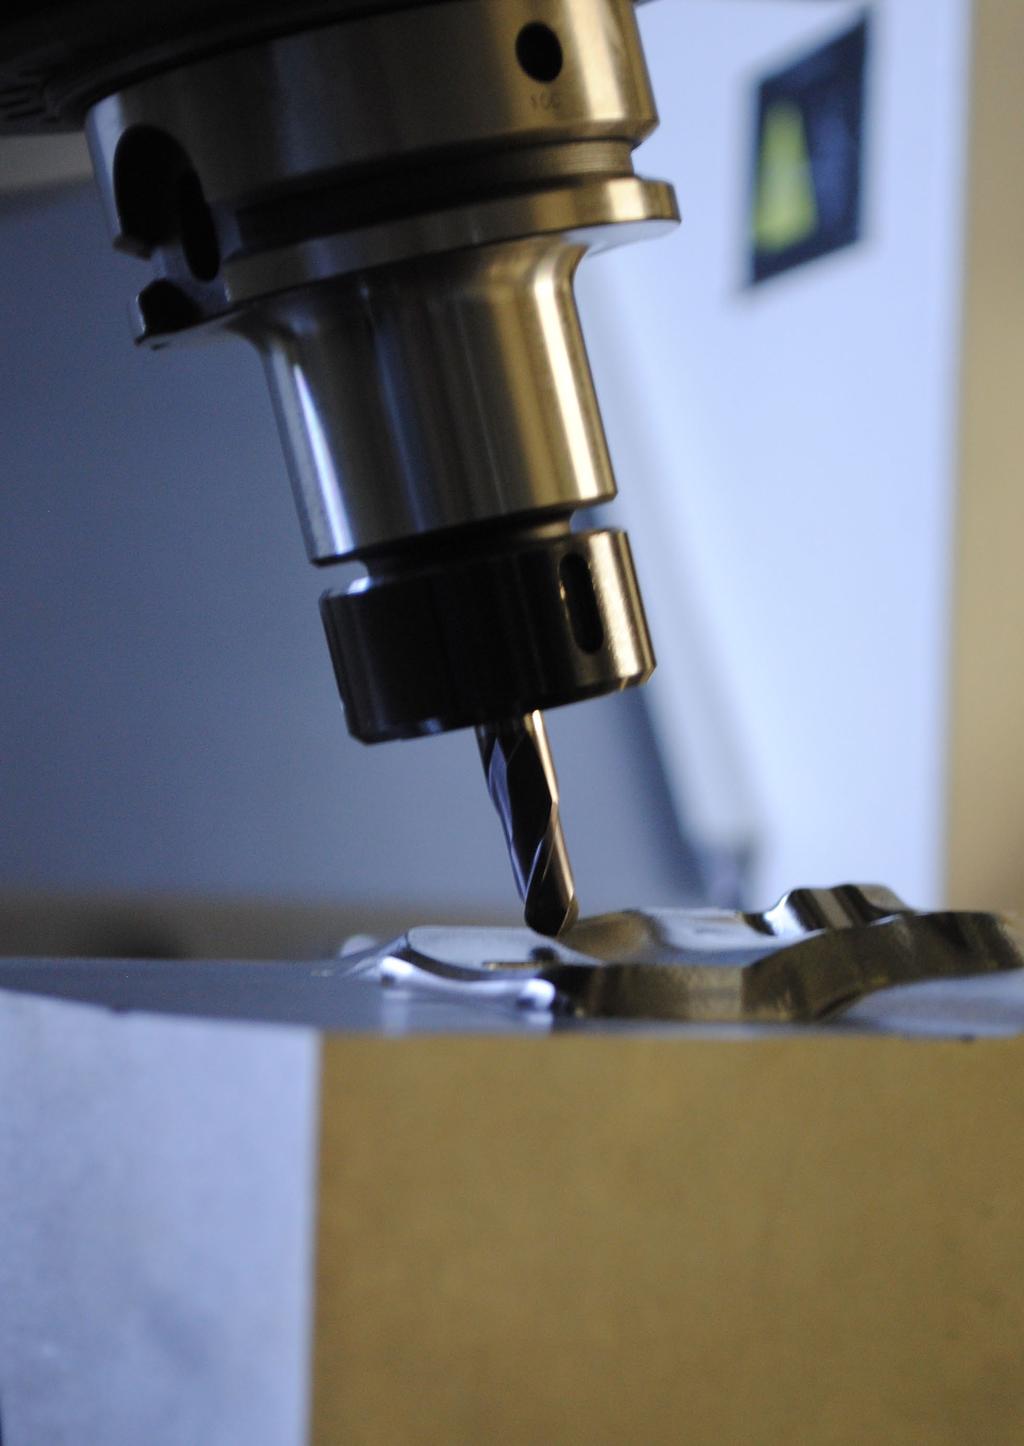 Tools, Dies and Moulds require innovative solutions to meet ever increasing customer demands.